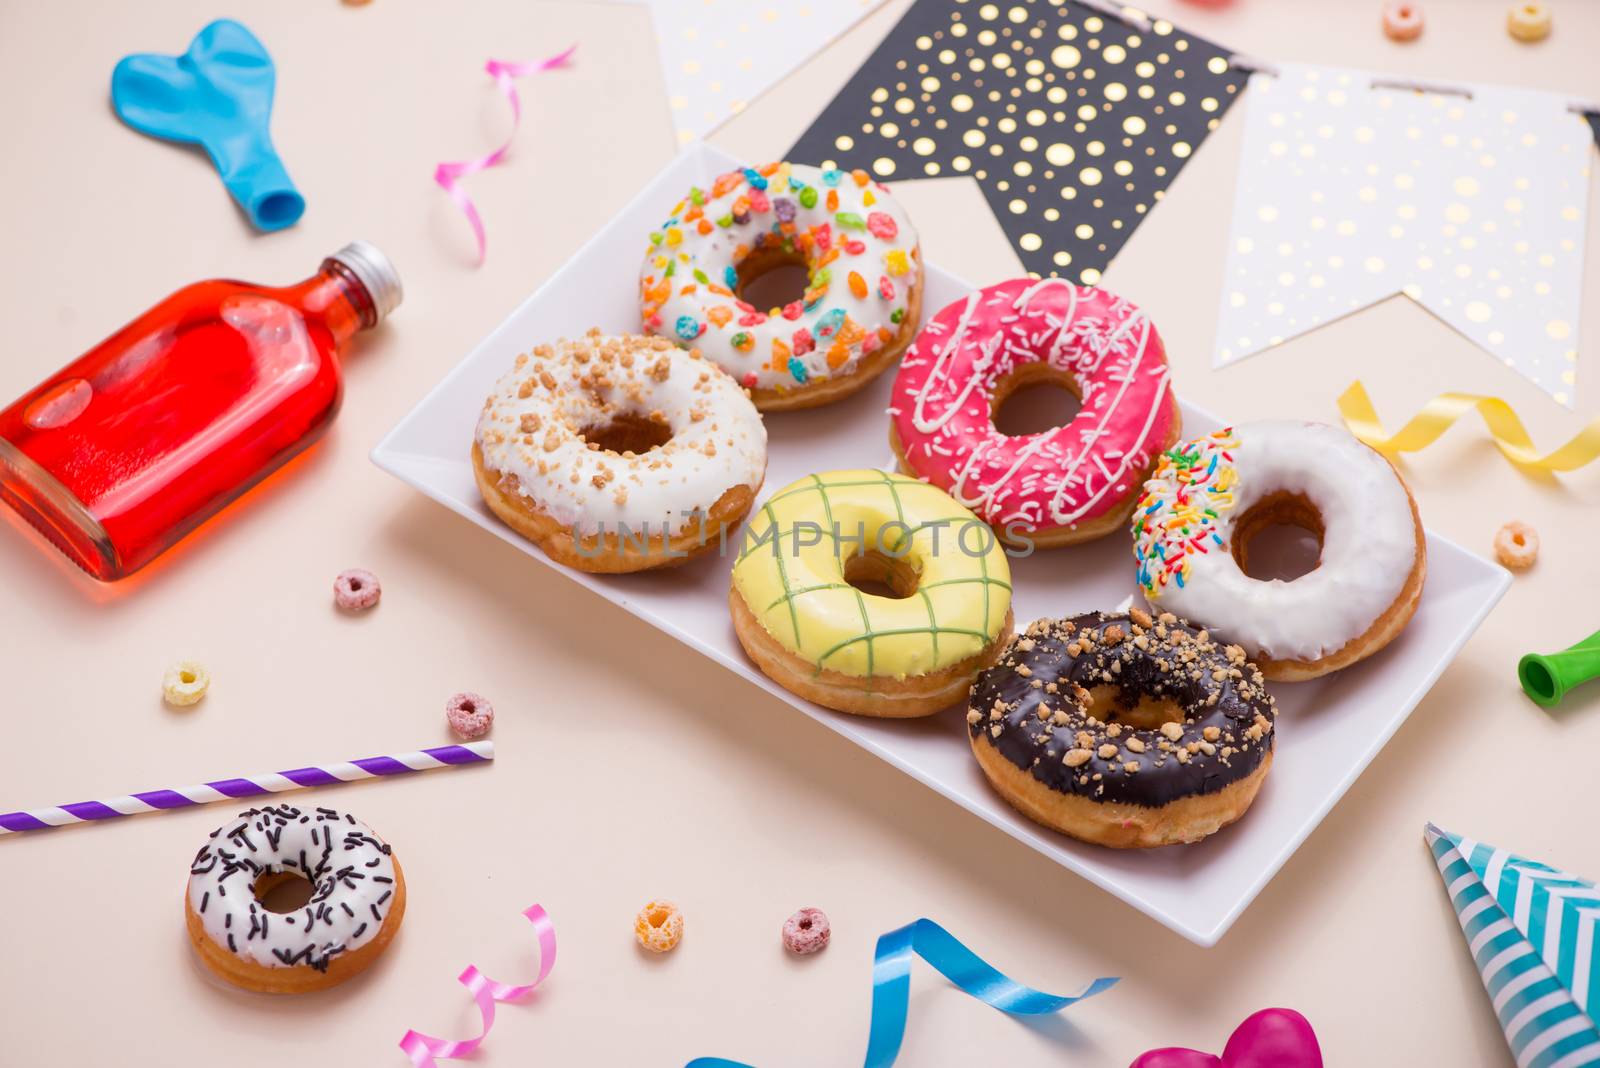 Party. Different colourful sugary round glazed donuts and bottles of drinks on light color background.